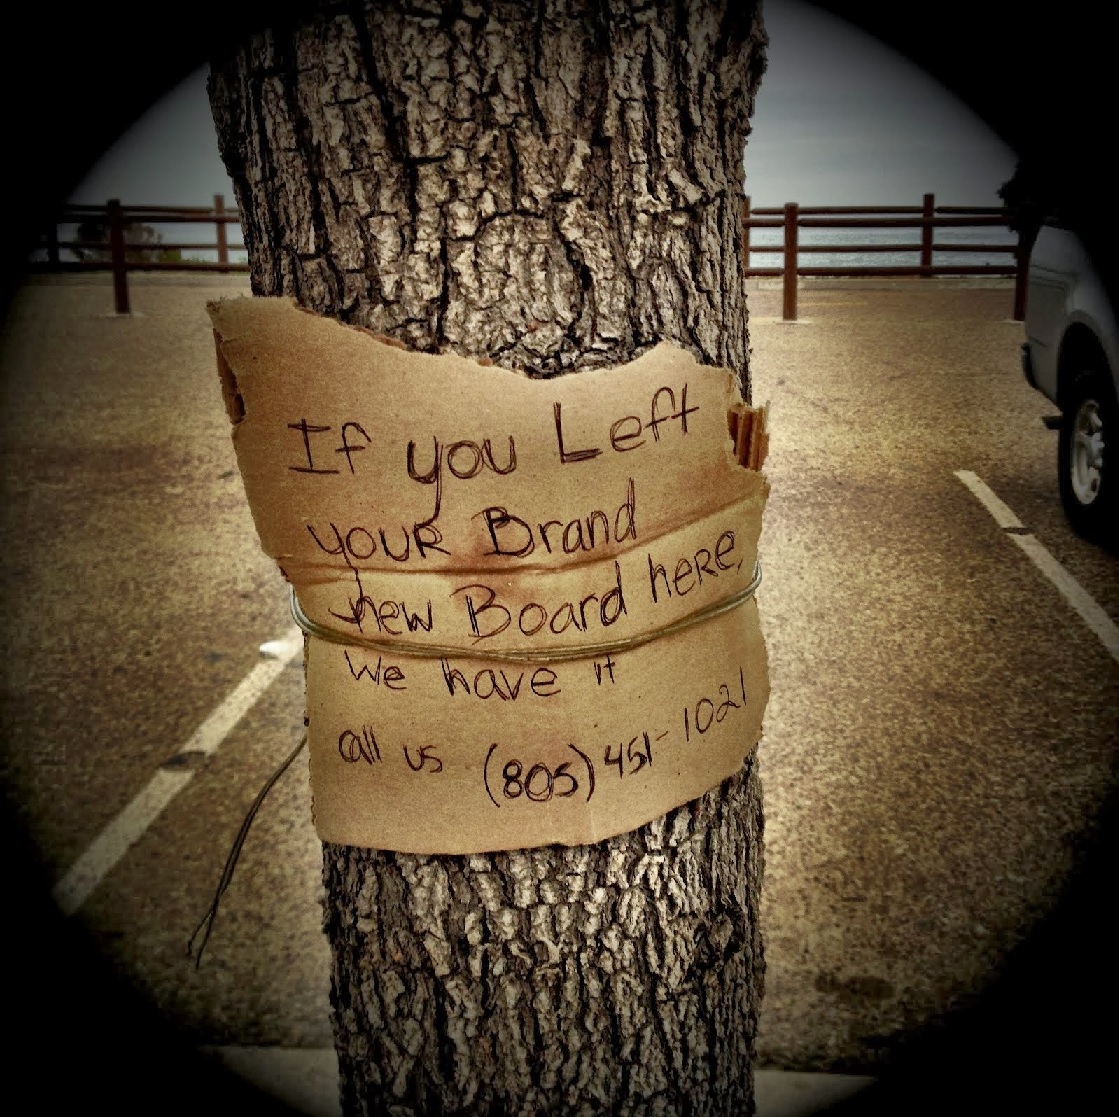 When some kids left this note to track down the owner of a forgotten skateboard that they could've easily stolen.